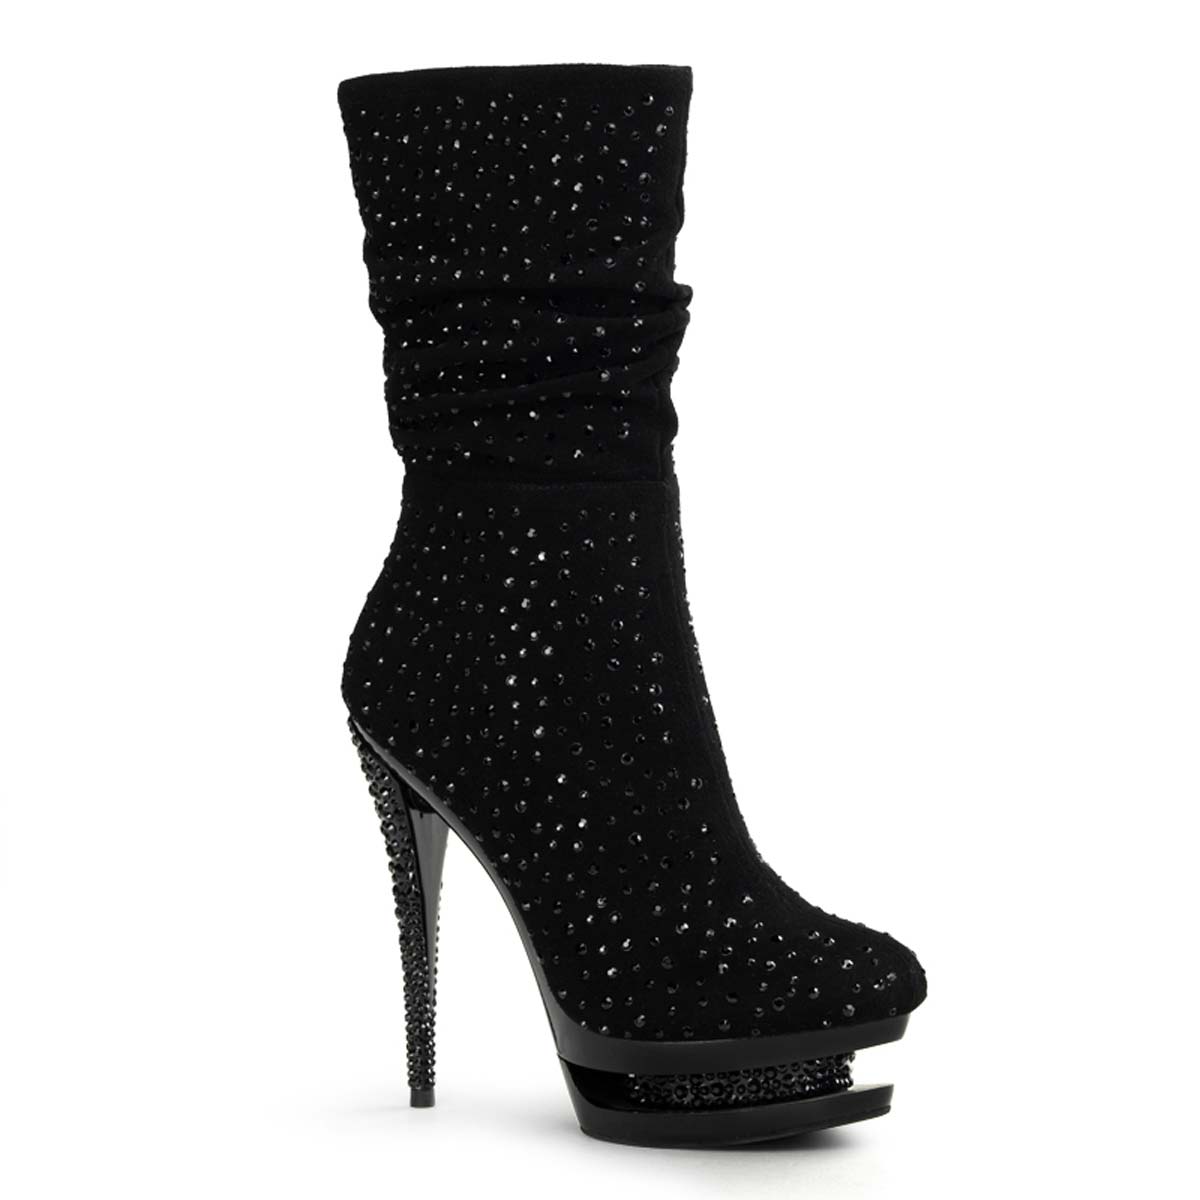 Pleaser Fascinate-1016 - Black Suede/Black in Sexy Boots - $63.88